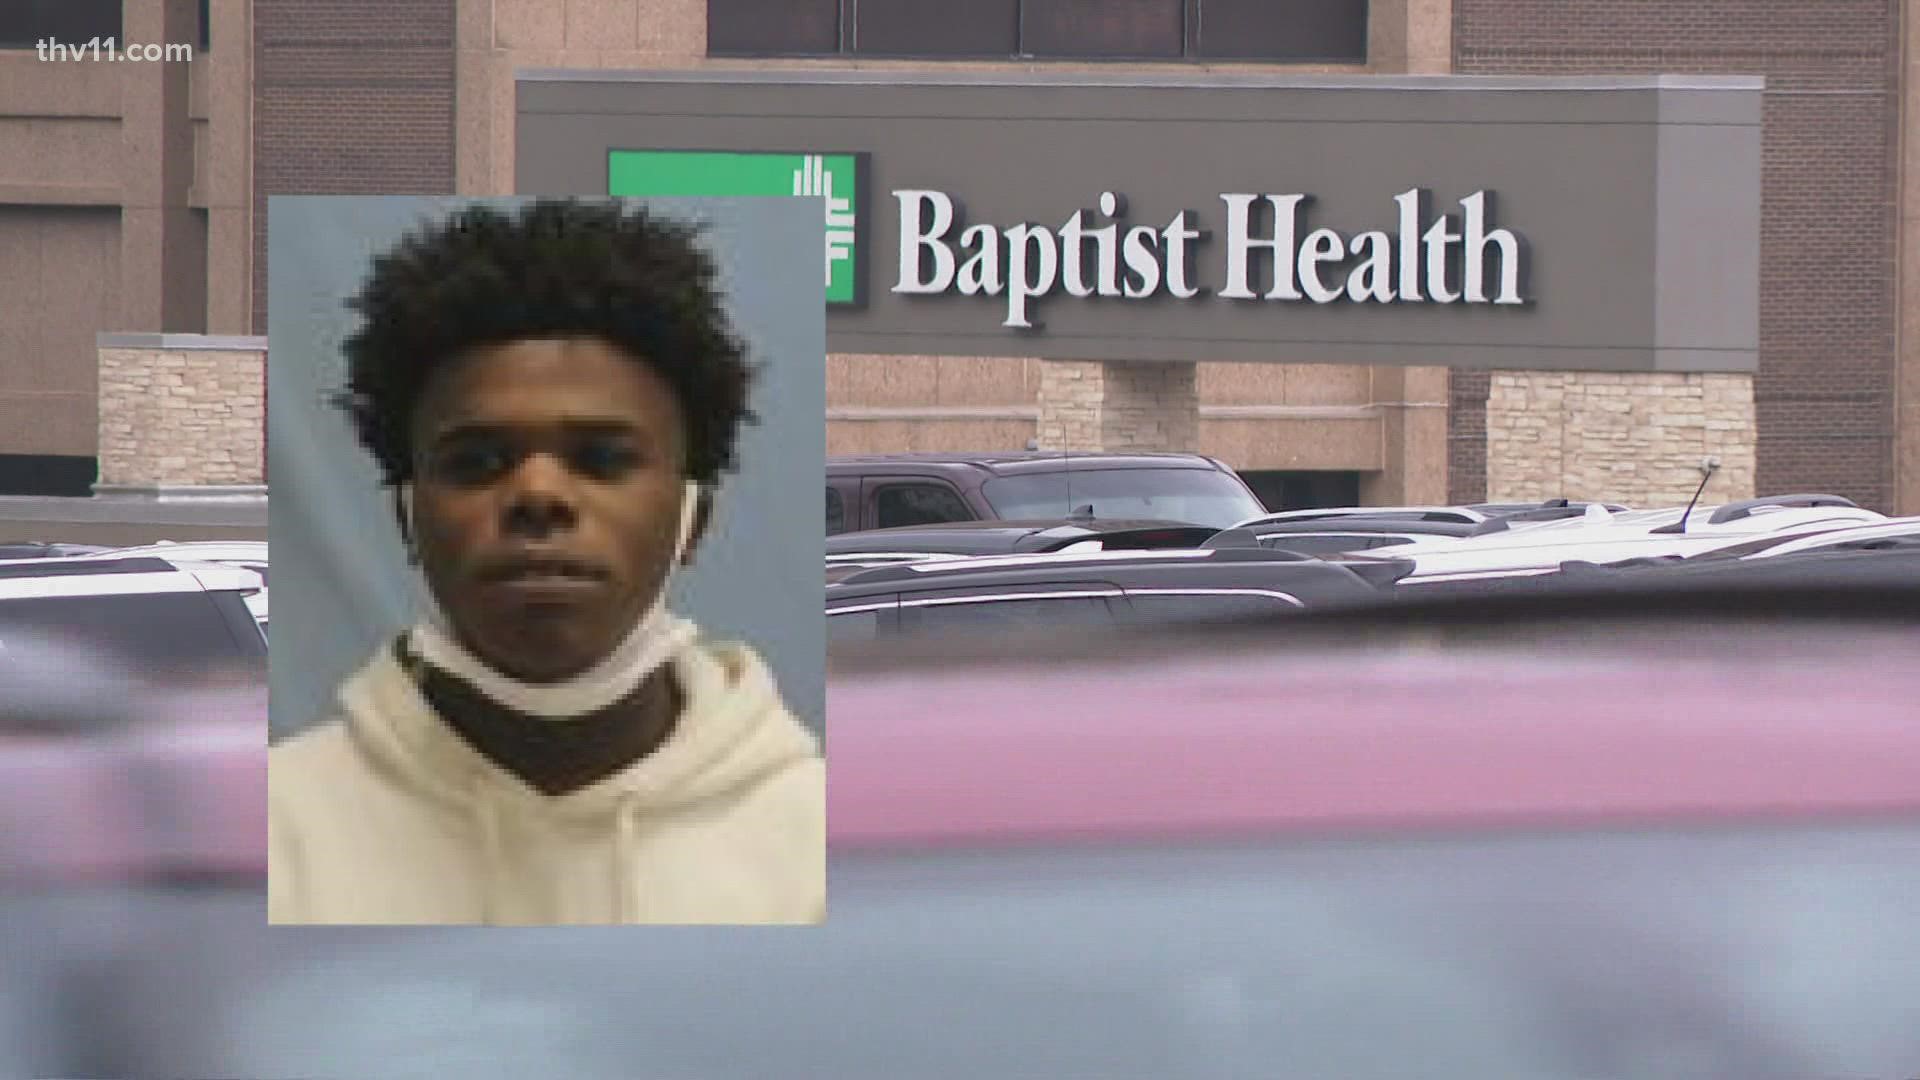 18-year-old Davareus Clark has been arrested in connection to two men who were found killed inside a vehicle in December 2021 outside of Baptist Health Hospital.